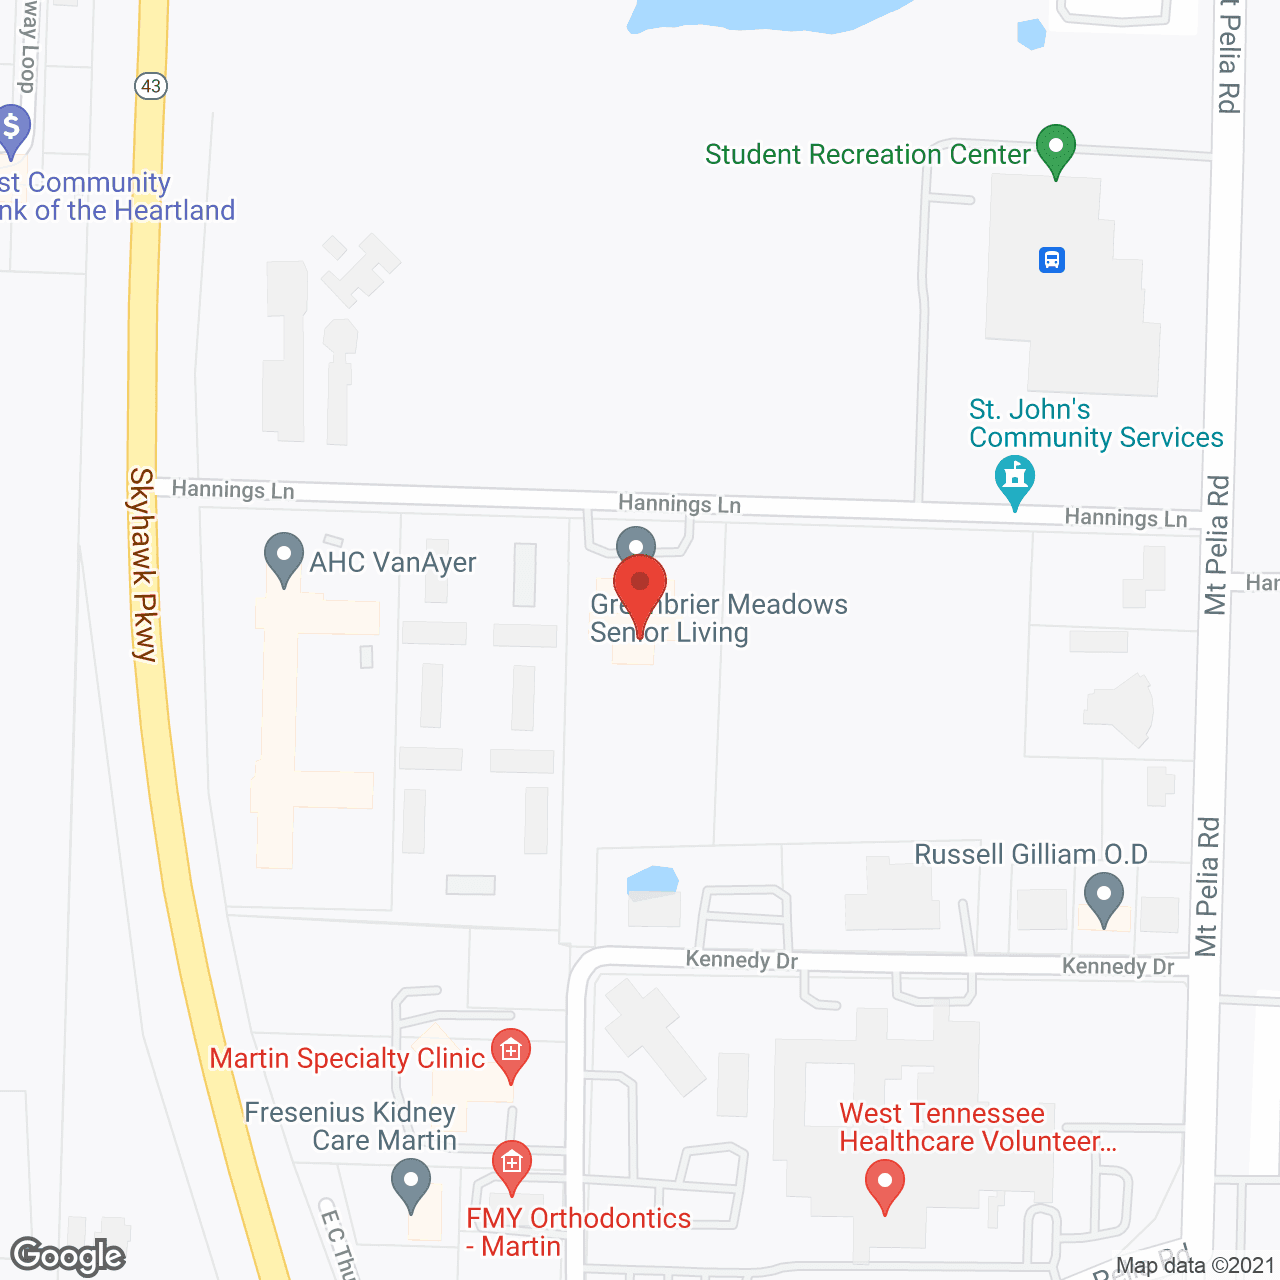 Greenbrier Meadows in google map